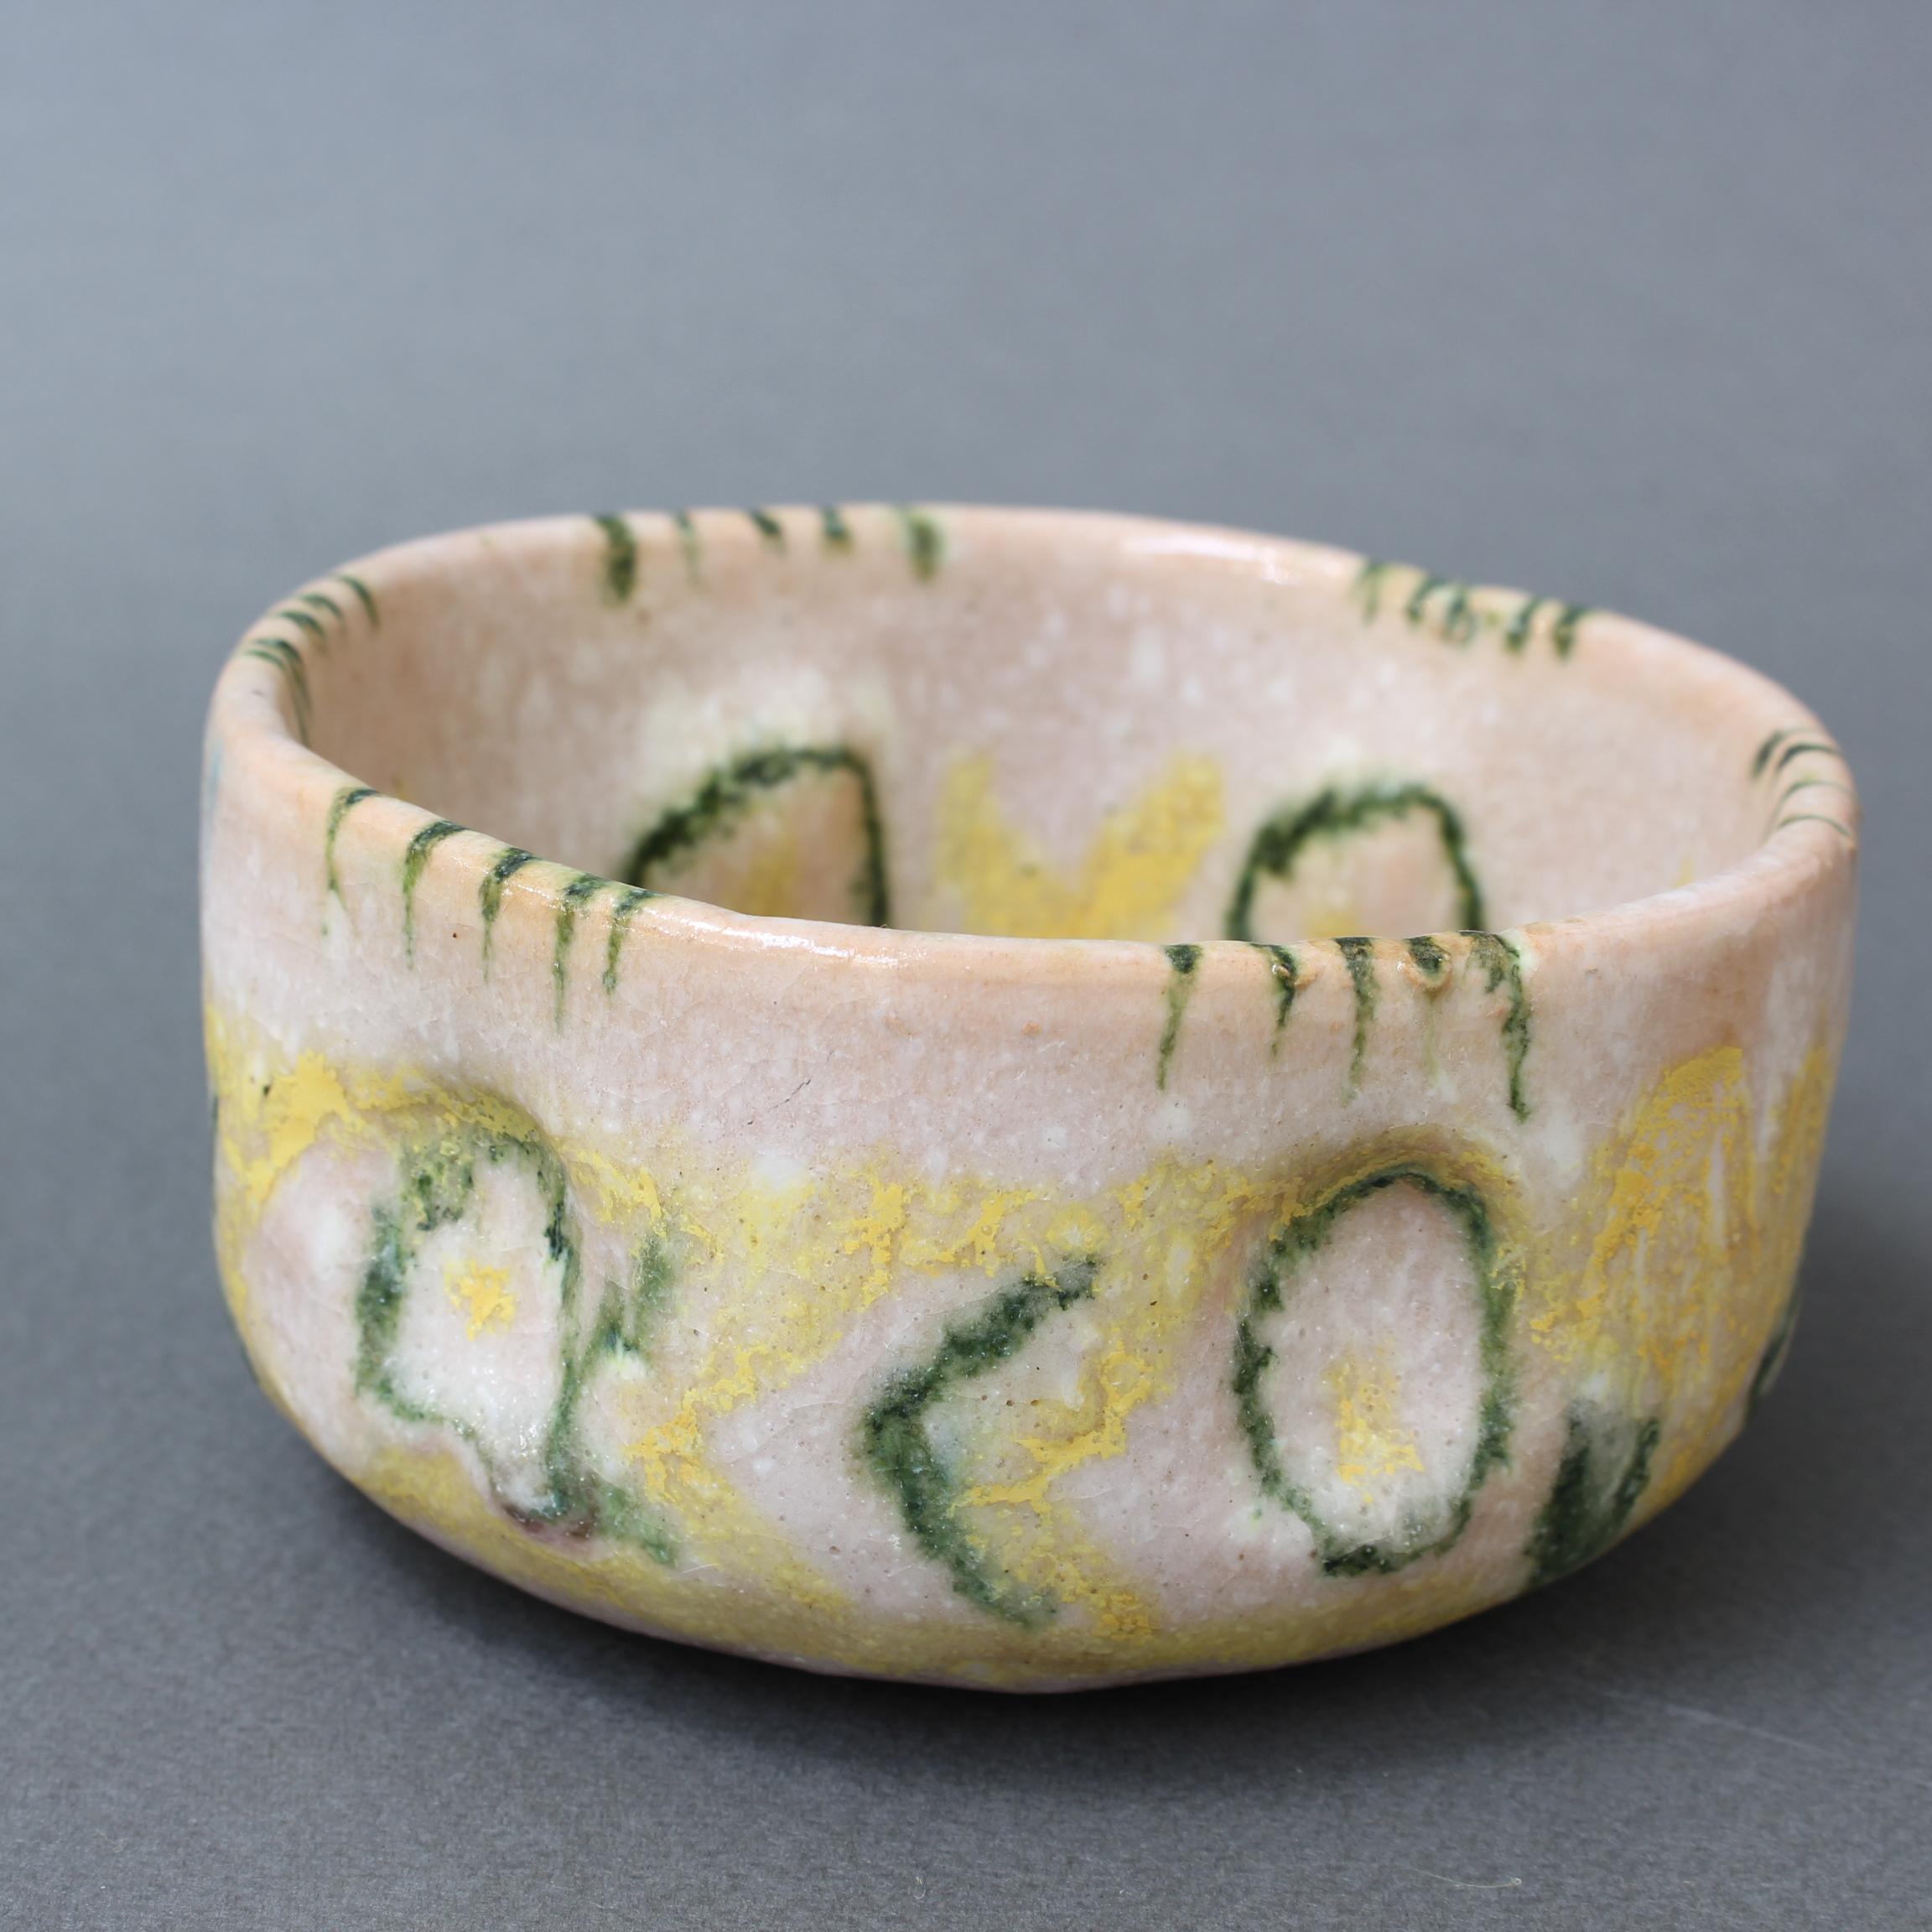 Small decorative Italian ceramic bowl by Guido Gambone (circa 1950s). Decorated on the inside with stylised yellow and green lemon wedges and flowers, the outer surface presents amorphous shapes in the same colors. The small bowl is utterly charming